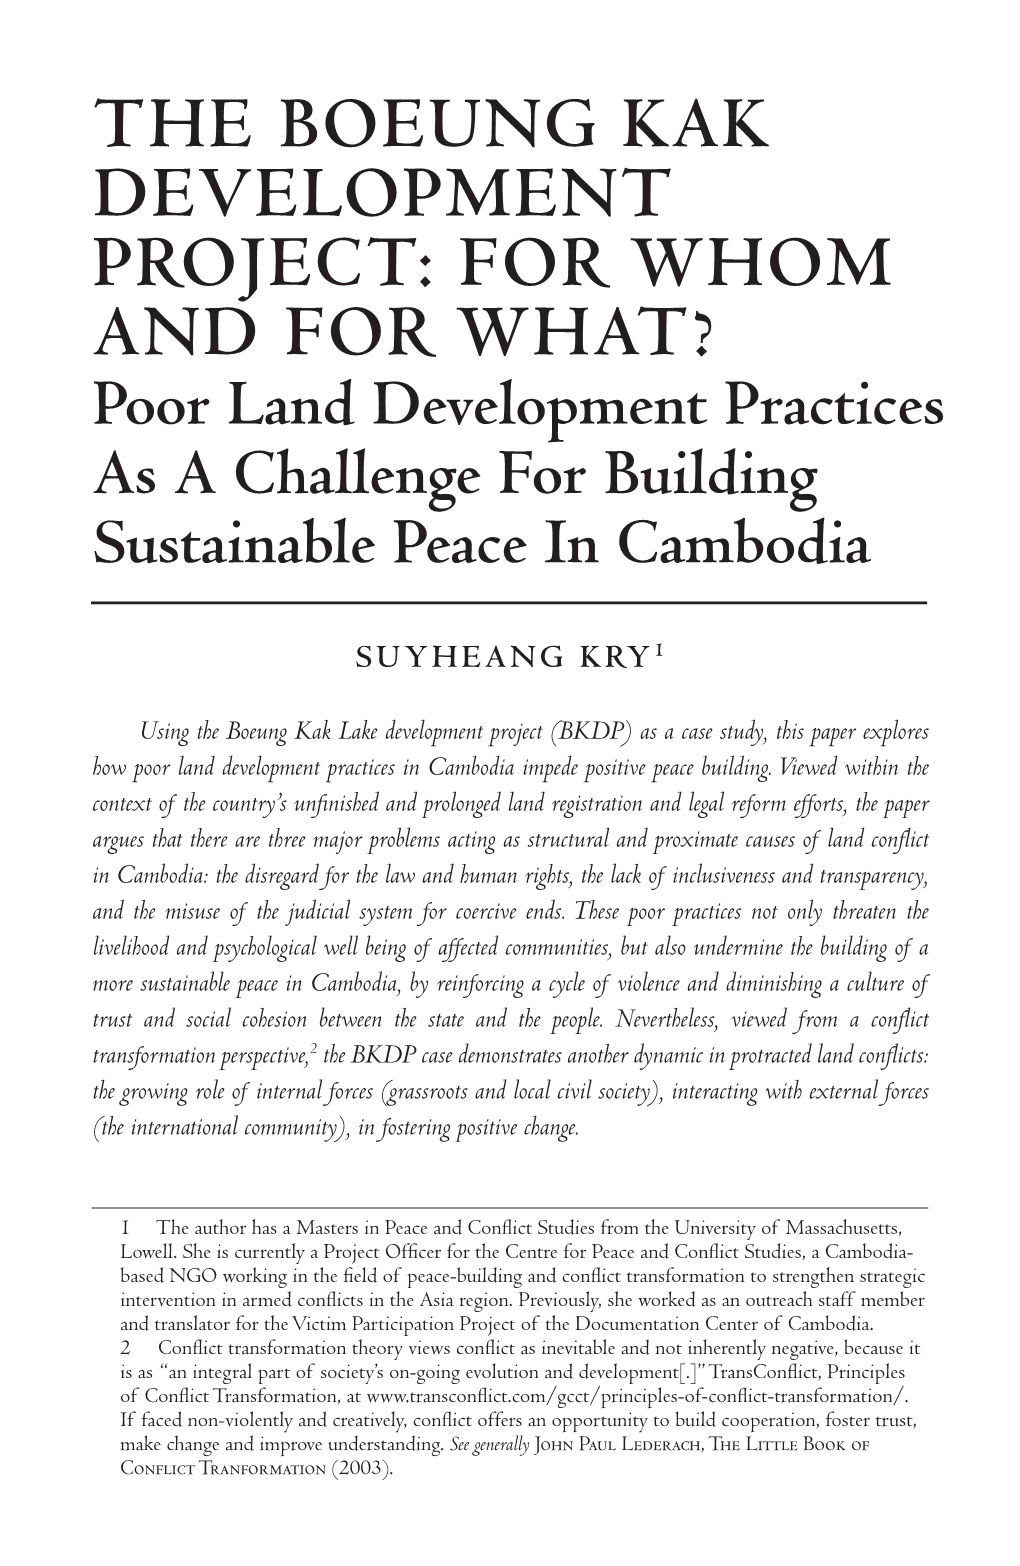 THE BOEUNG KAK DEVELOPMENT PROJECT: for WHOM and for WHAT? Poor Land Development Practices As a Challenge for Building Sustainable Peace in Cambodia